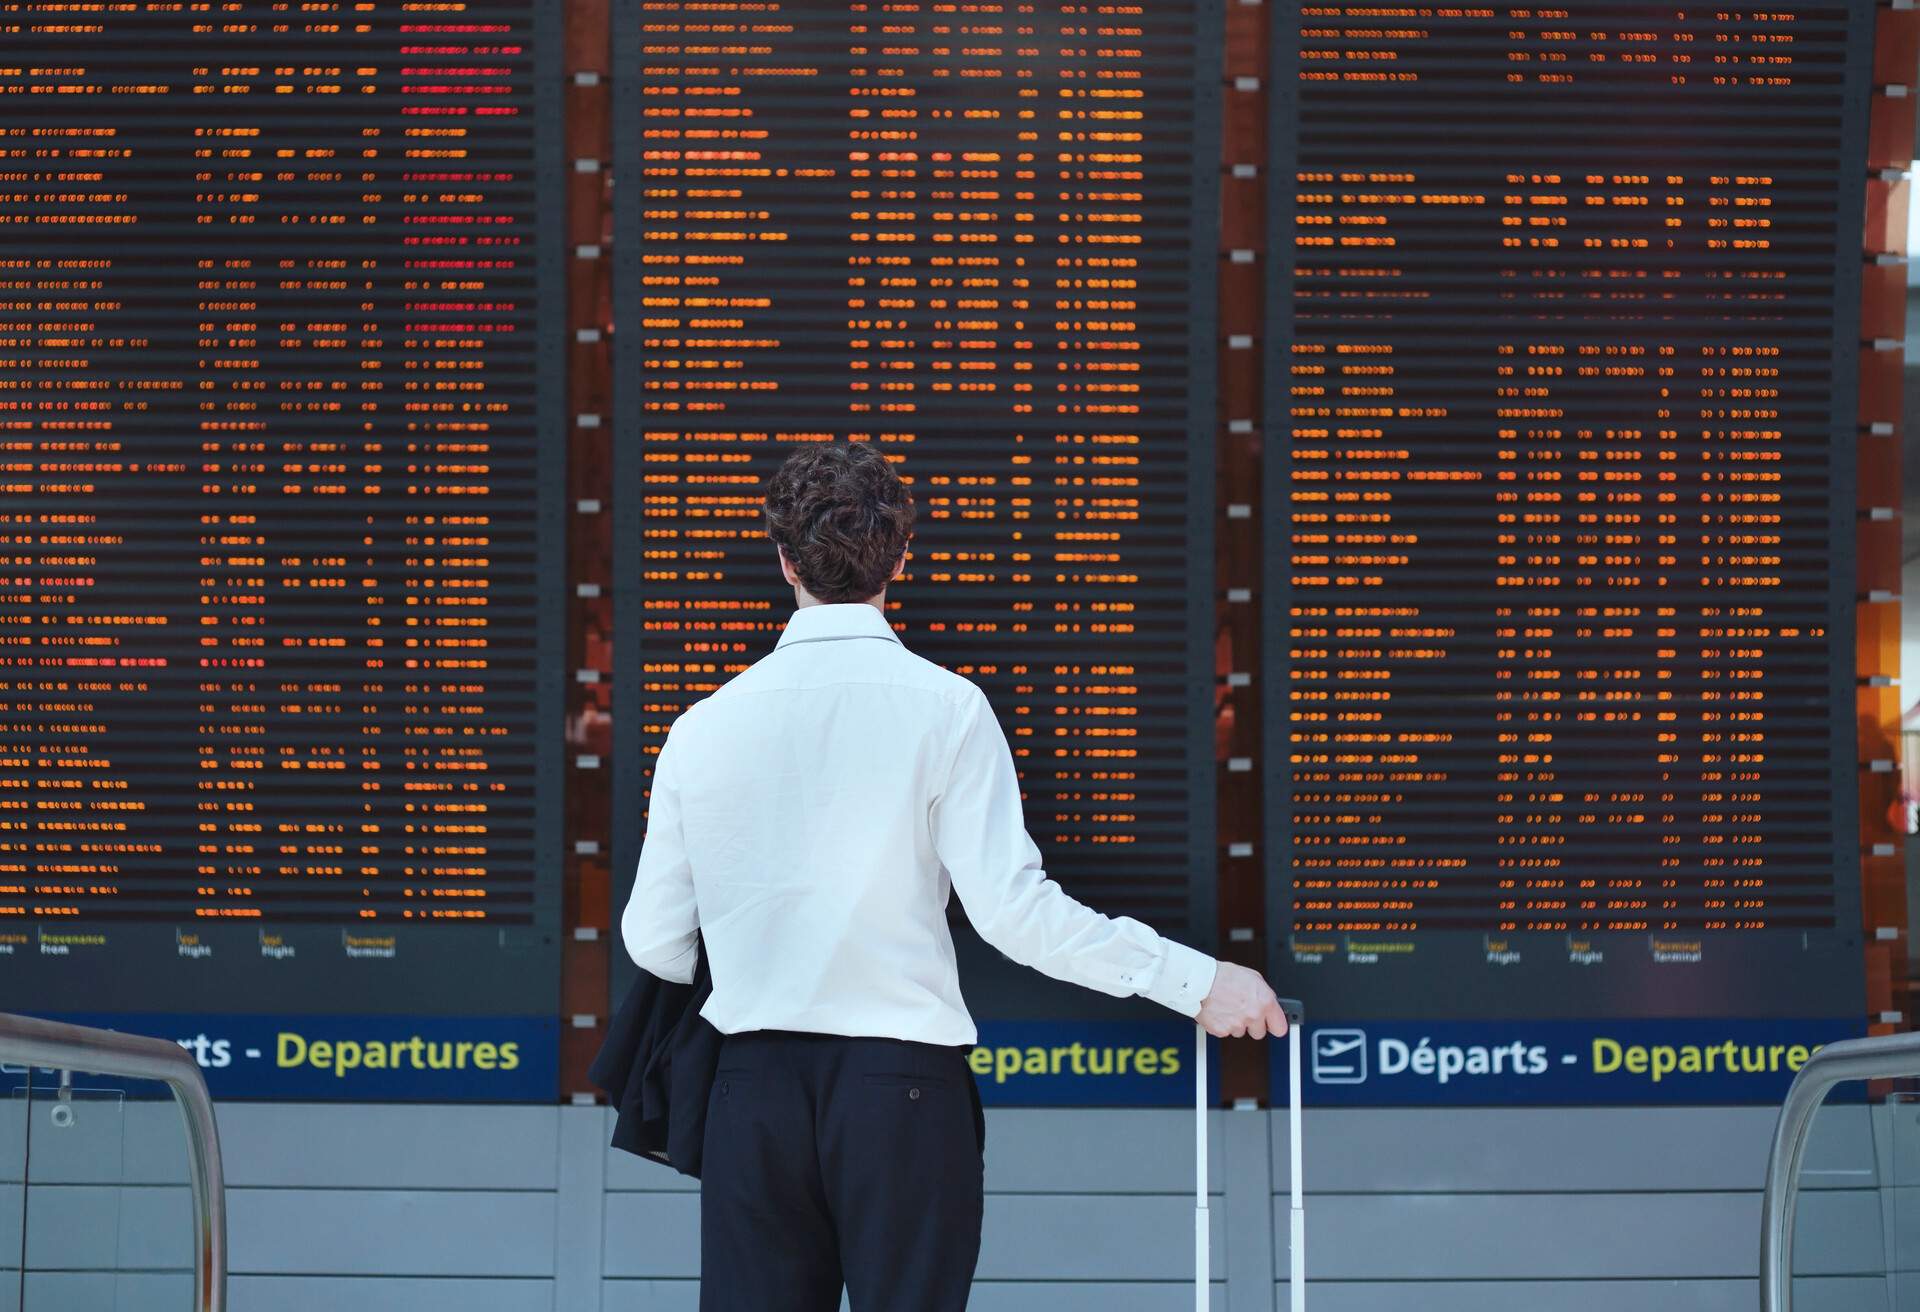 Passenger looking at timetable board at the airport.